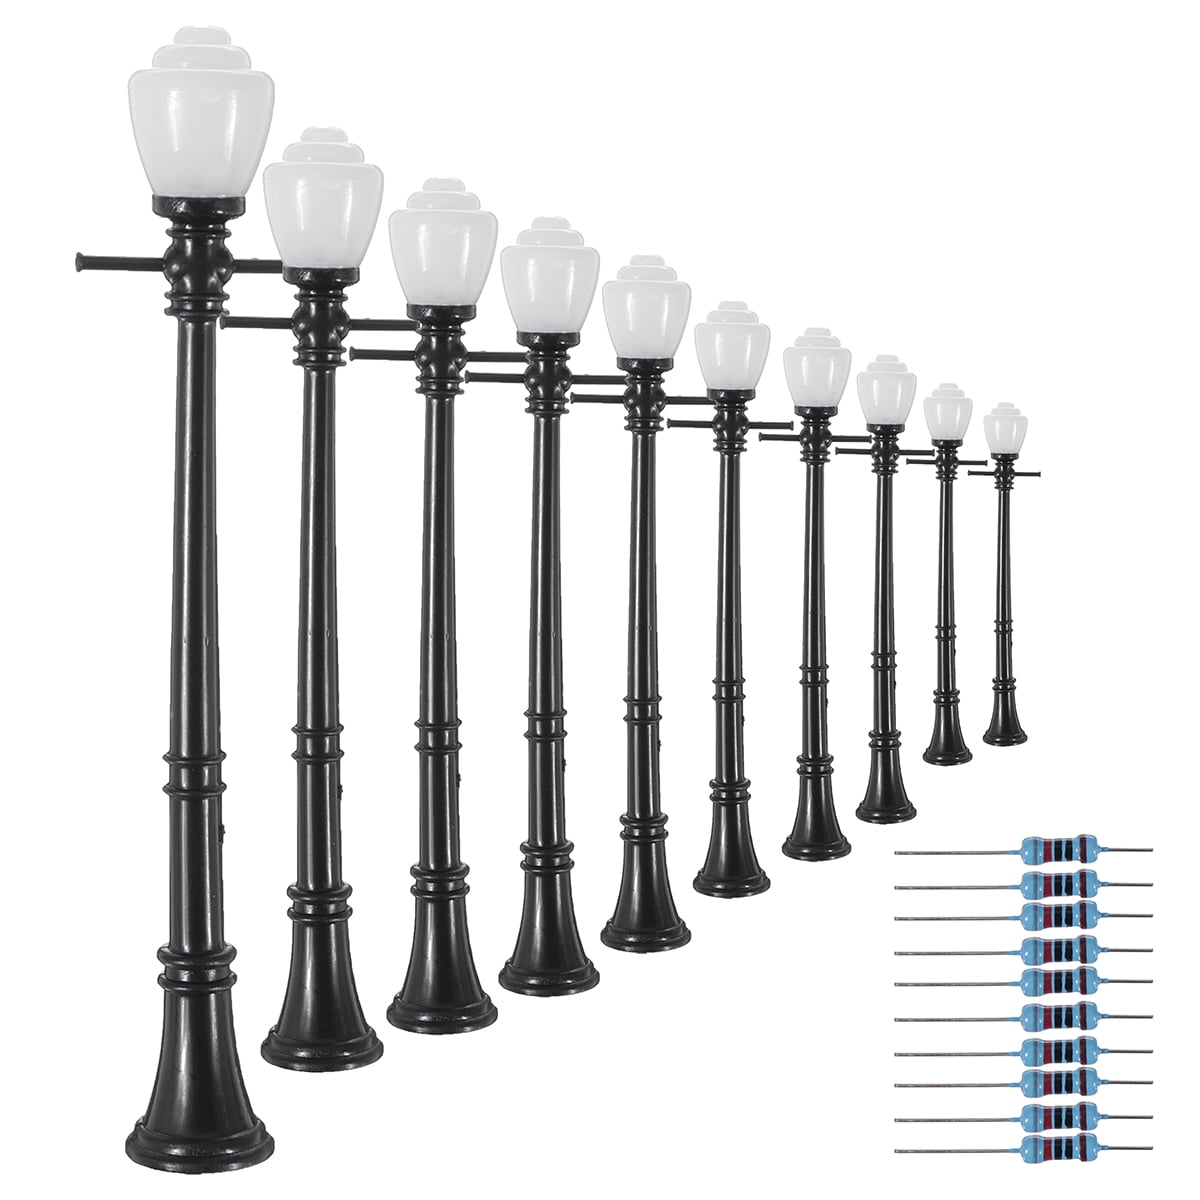 LCX04 10pcs Model Railway Lamppost lamps Street Lights O Scale LEDs White Color 